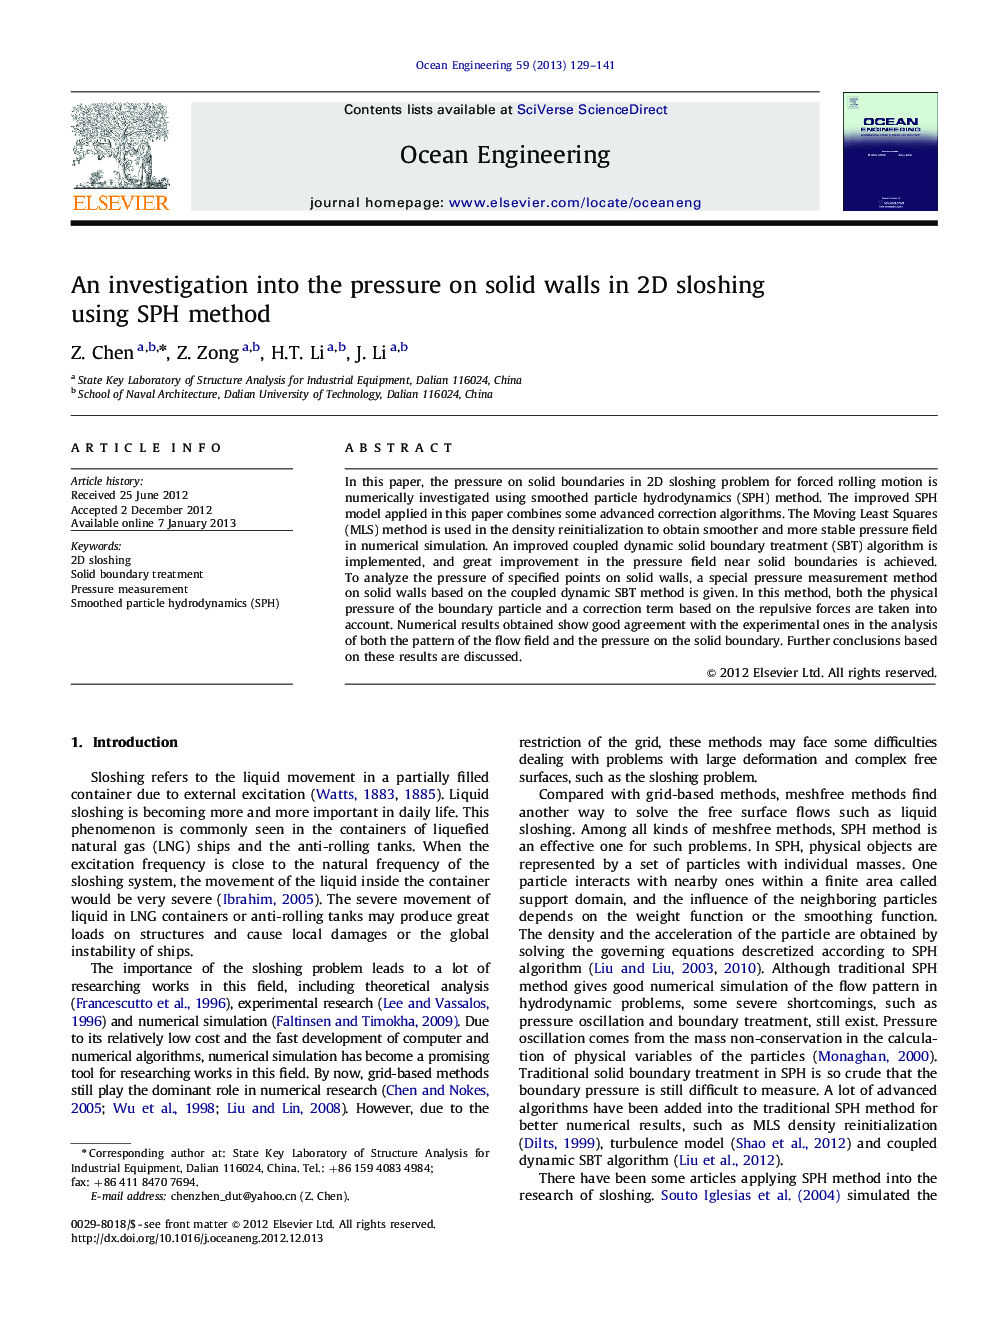 An investigation into the pressure on solid walls in 2D sloshing using SPH method